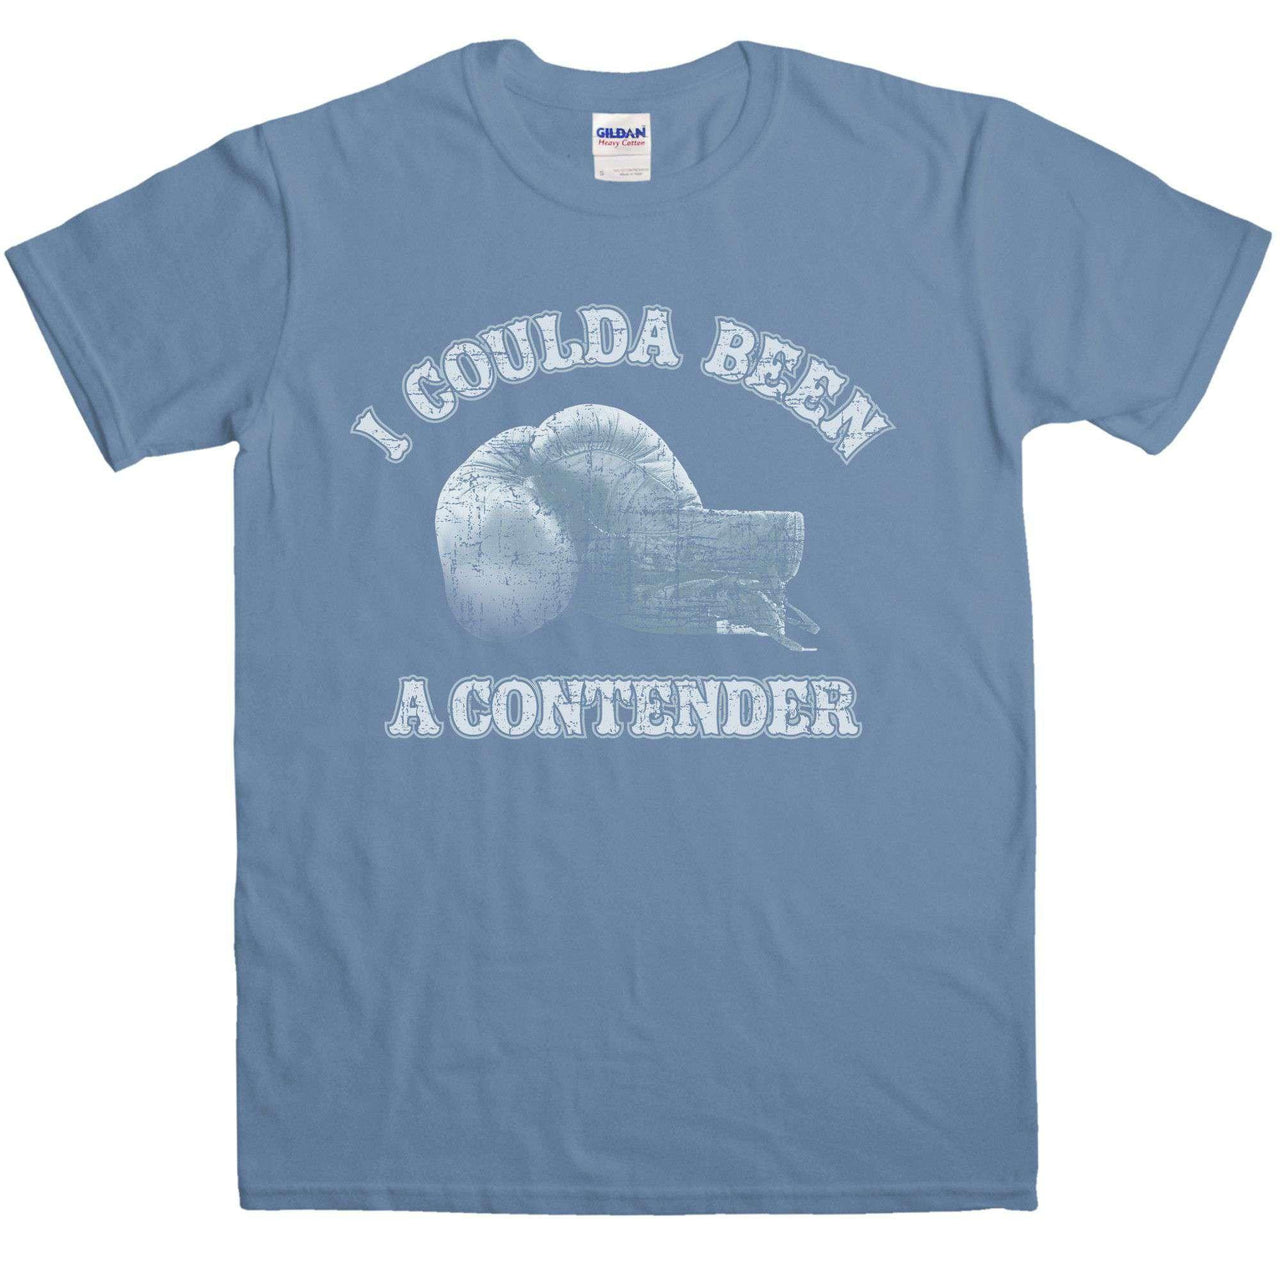 Coulda Been A Contender T-Shirt For Men 8Ball